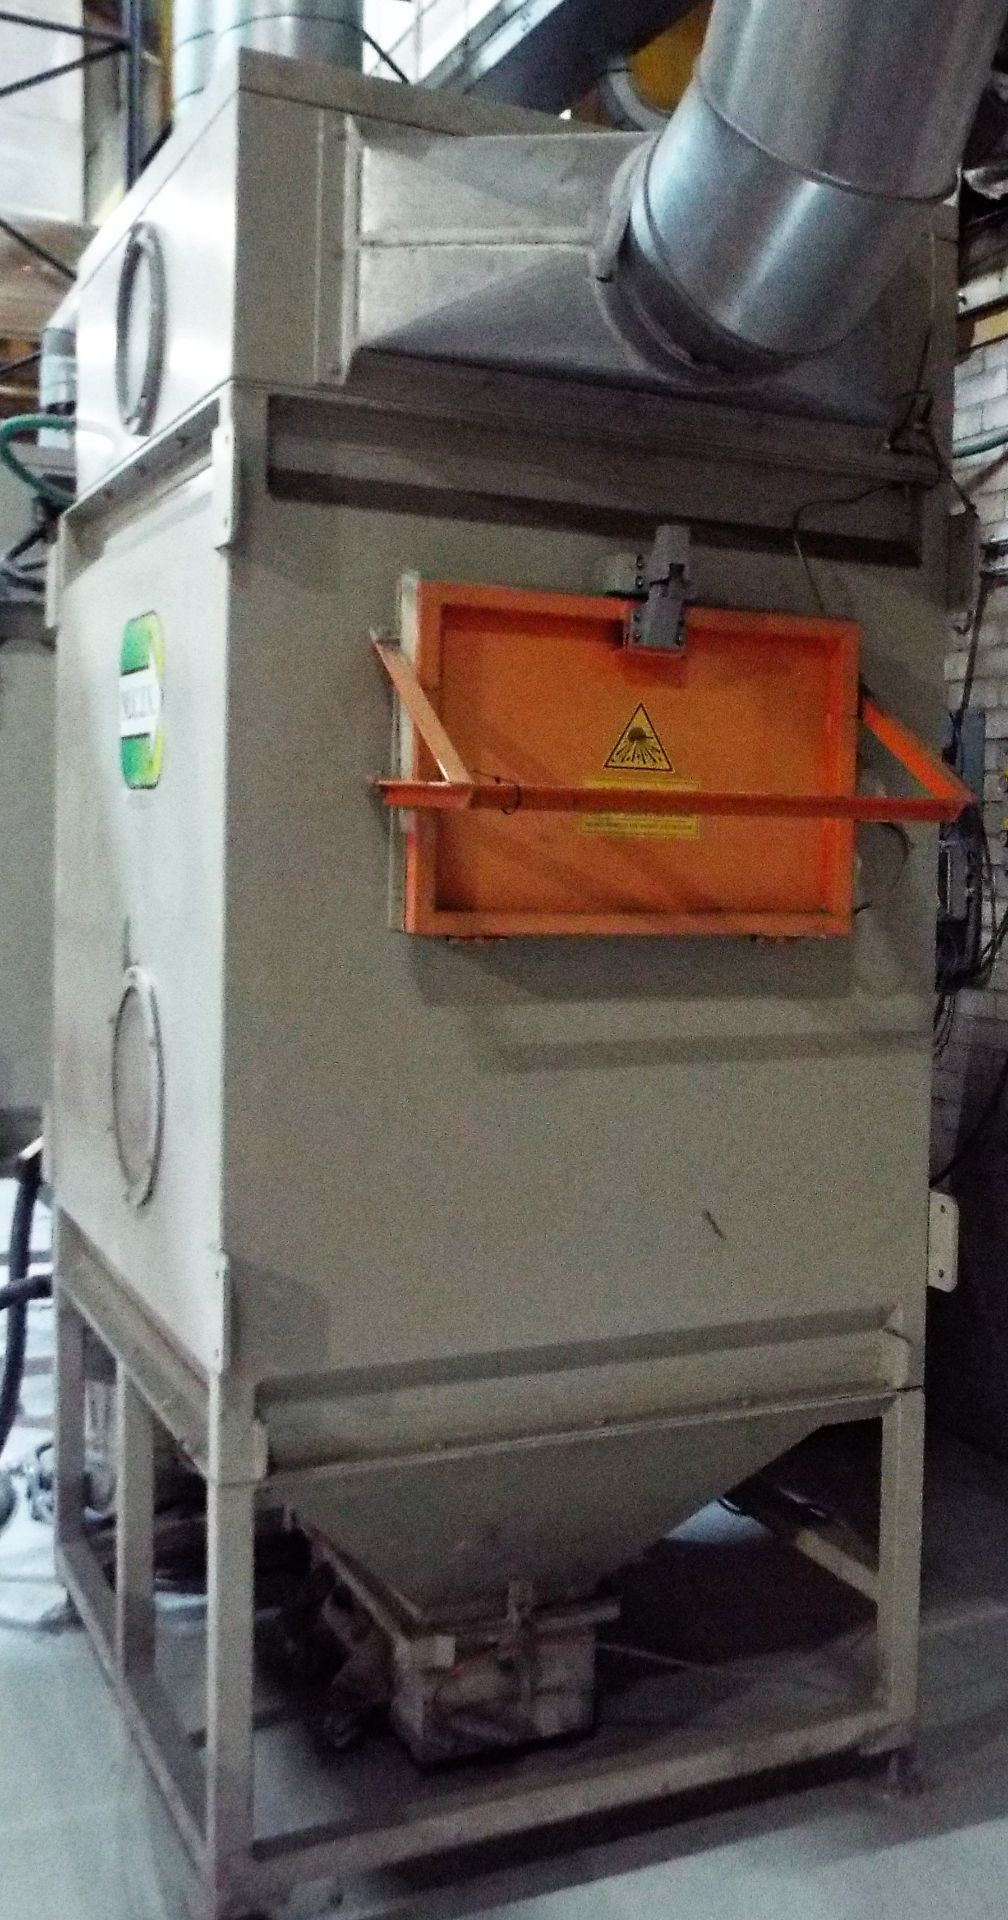 Atex Rated Reverse Jet Dust Extractor - Image 2 of 5